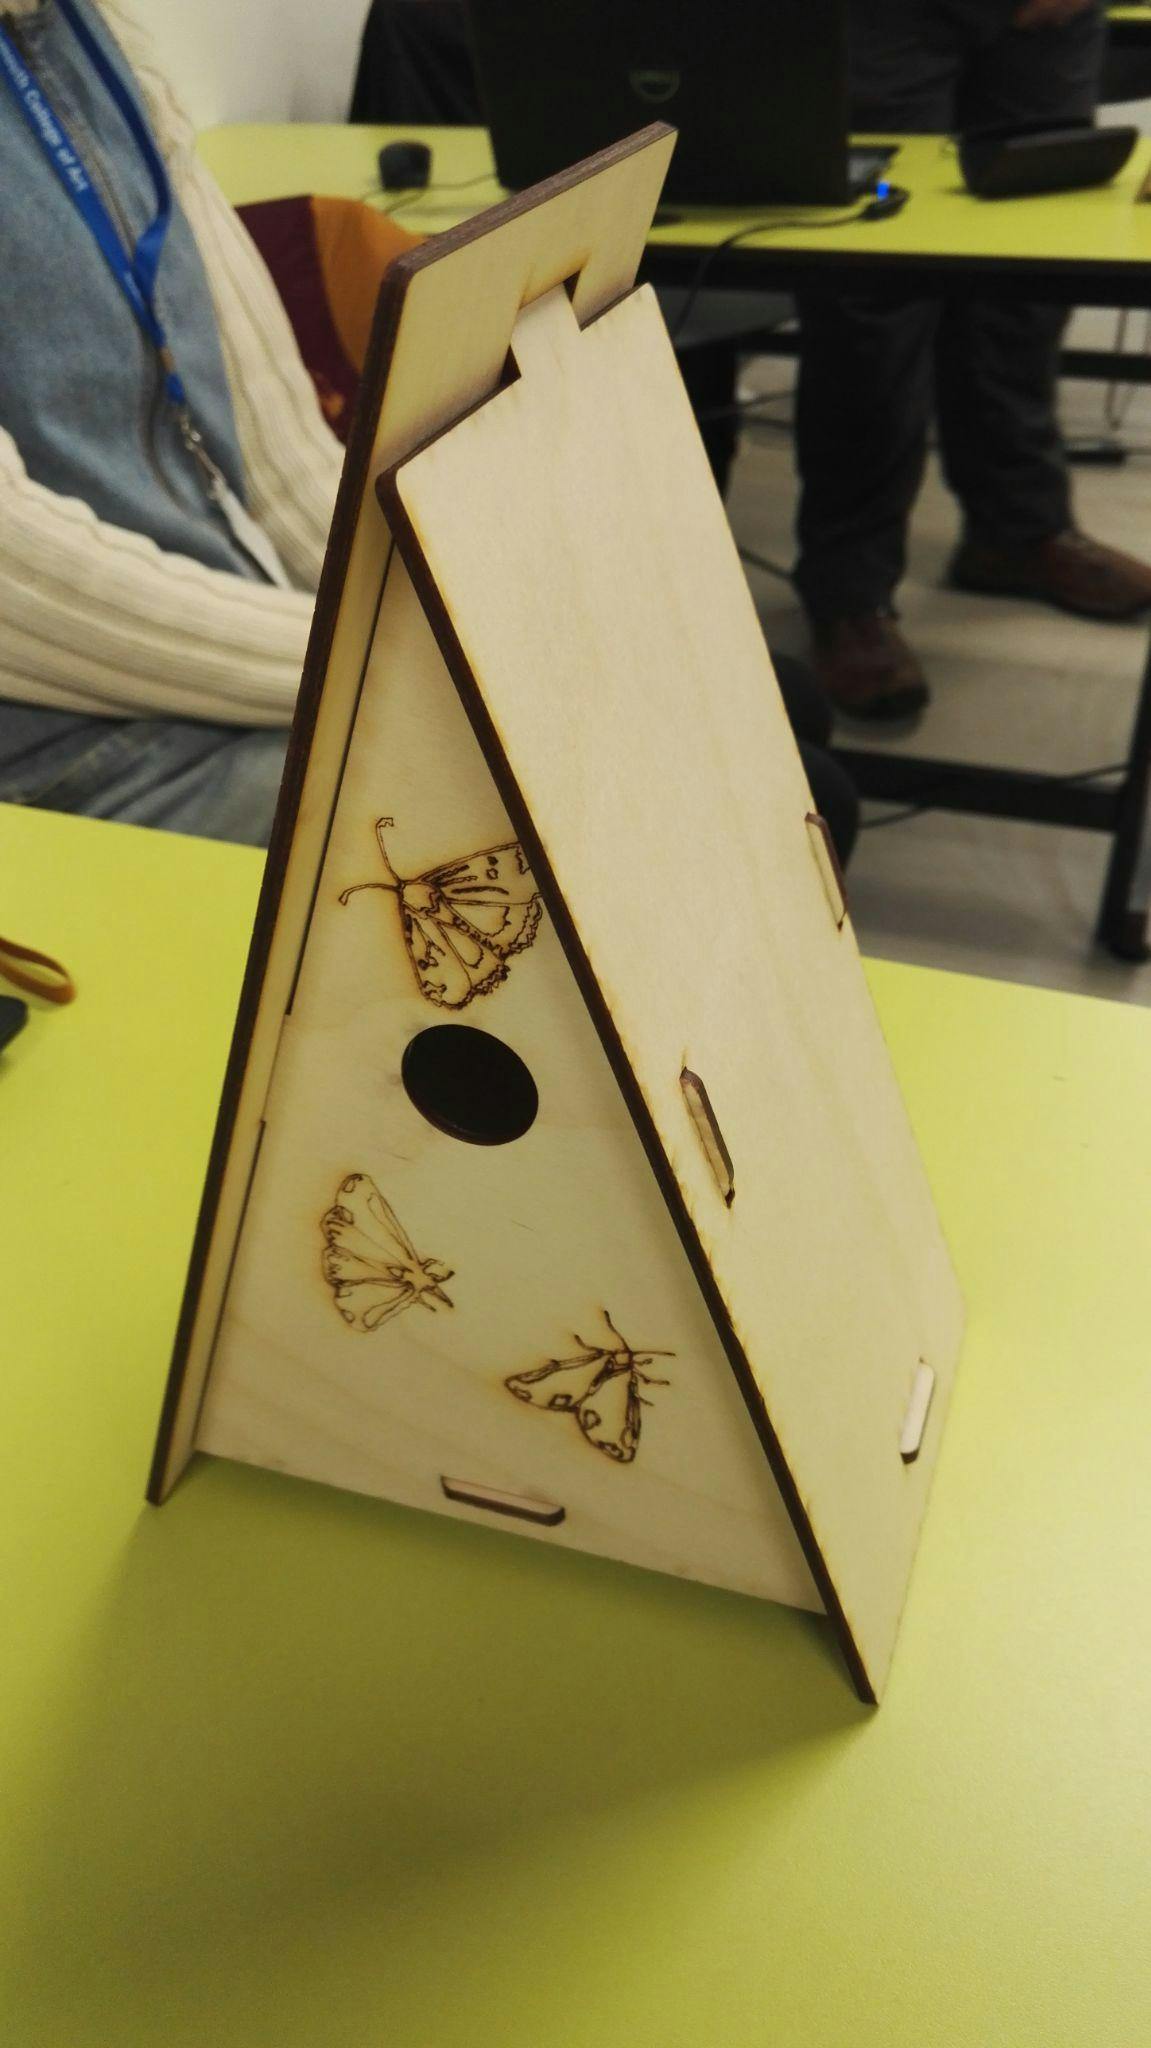 Image shows a lazer cut bird house in a triangle A frame type design made out of wood